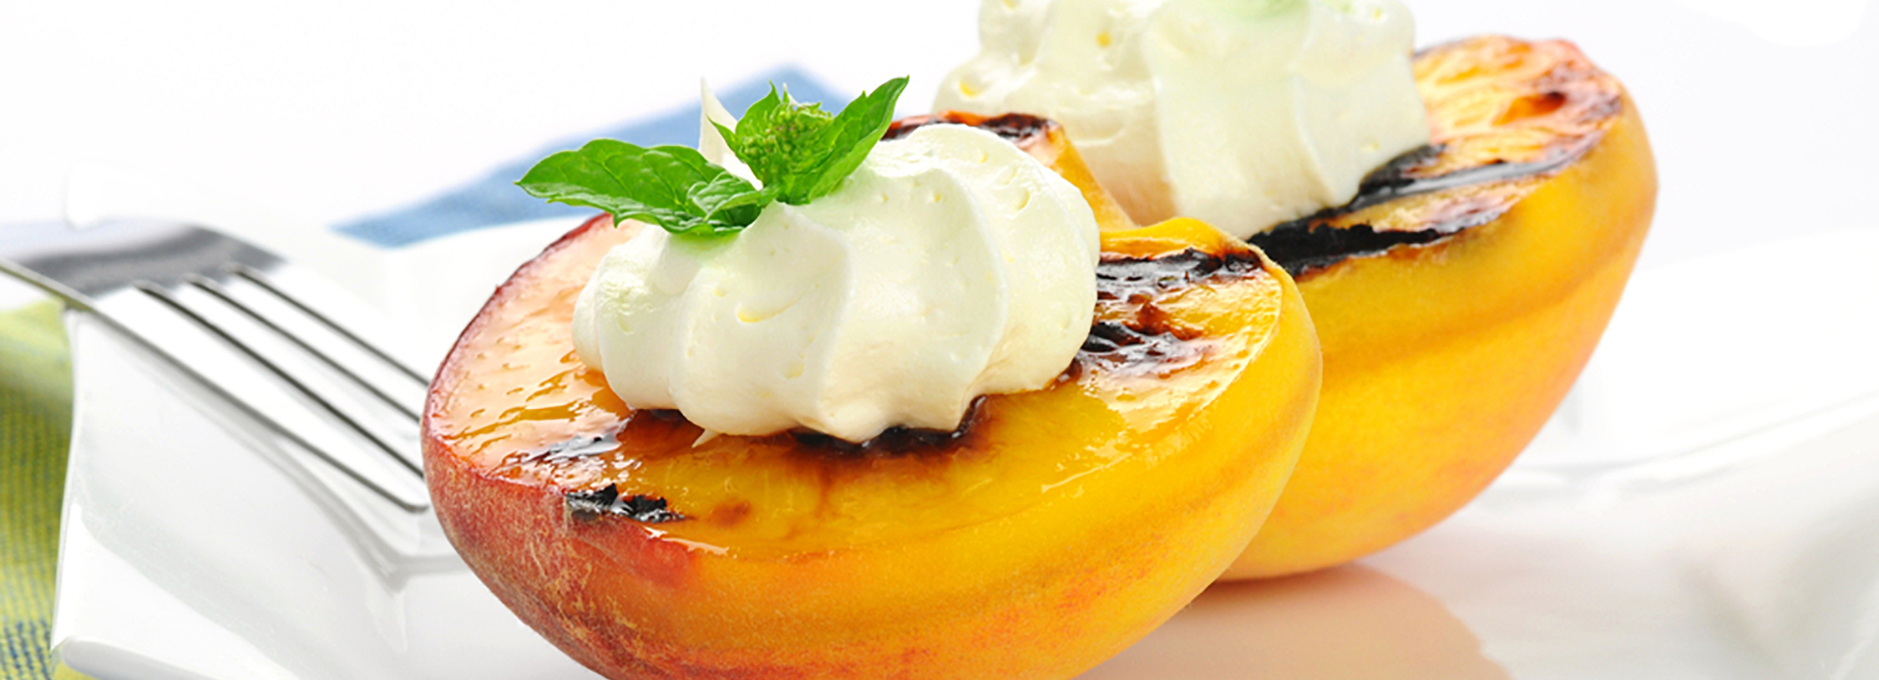 GRILLED PEACHES WITH SILANI MASCARPONE WHIP